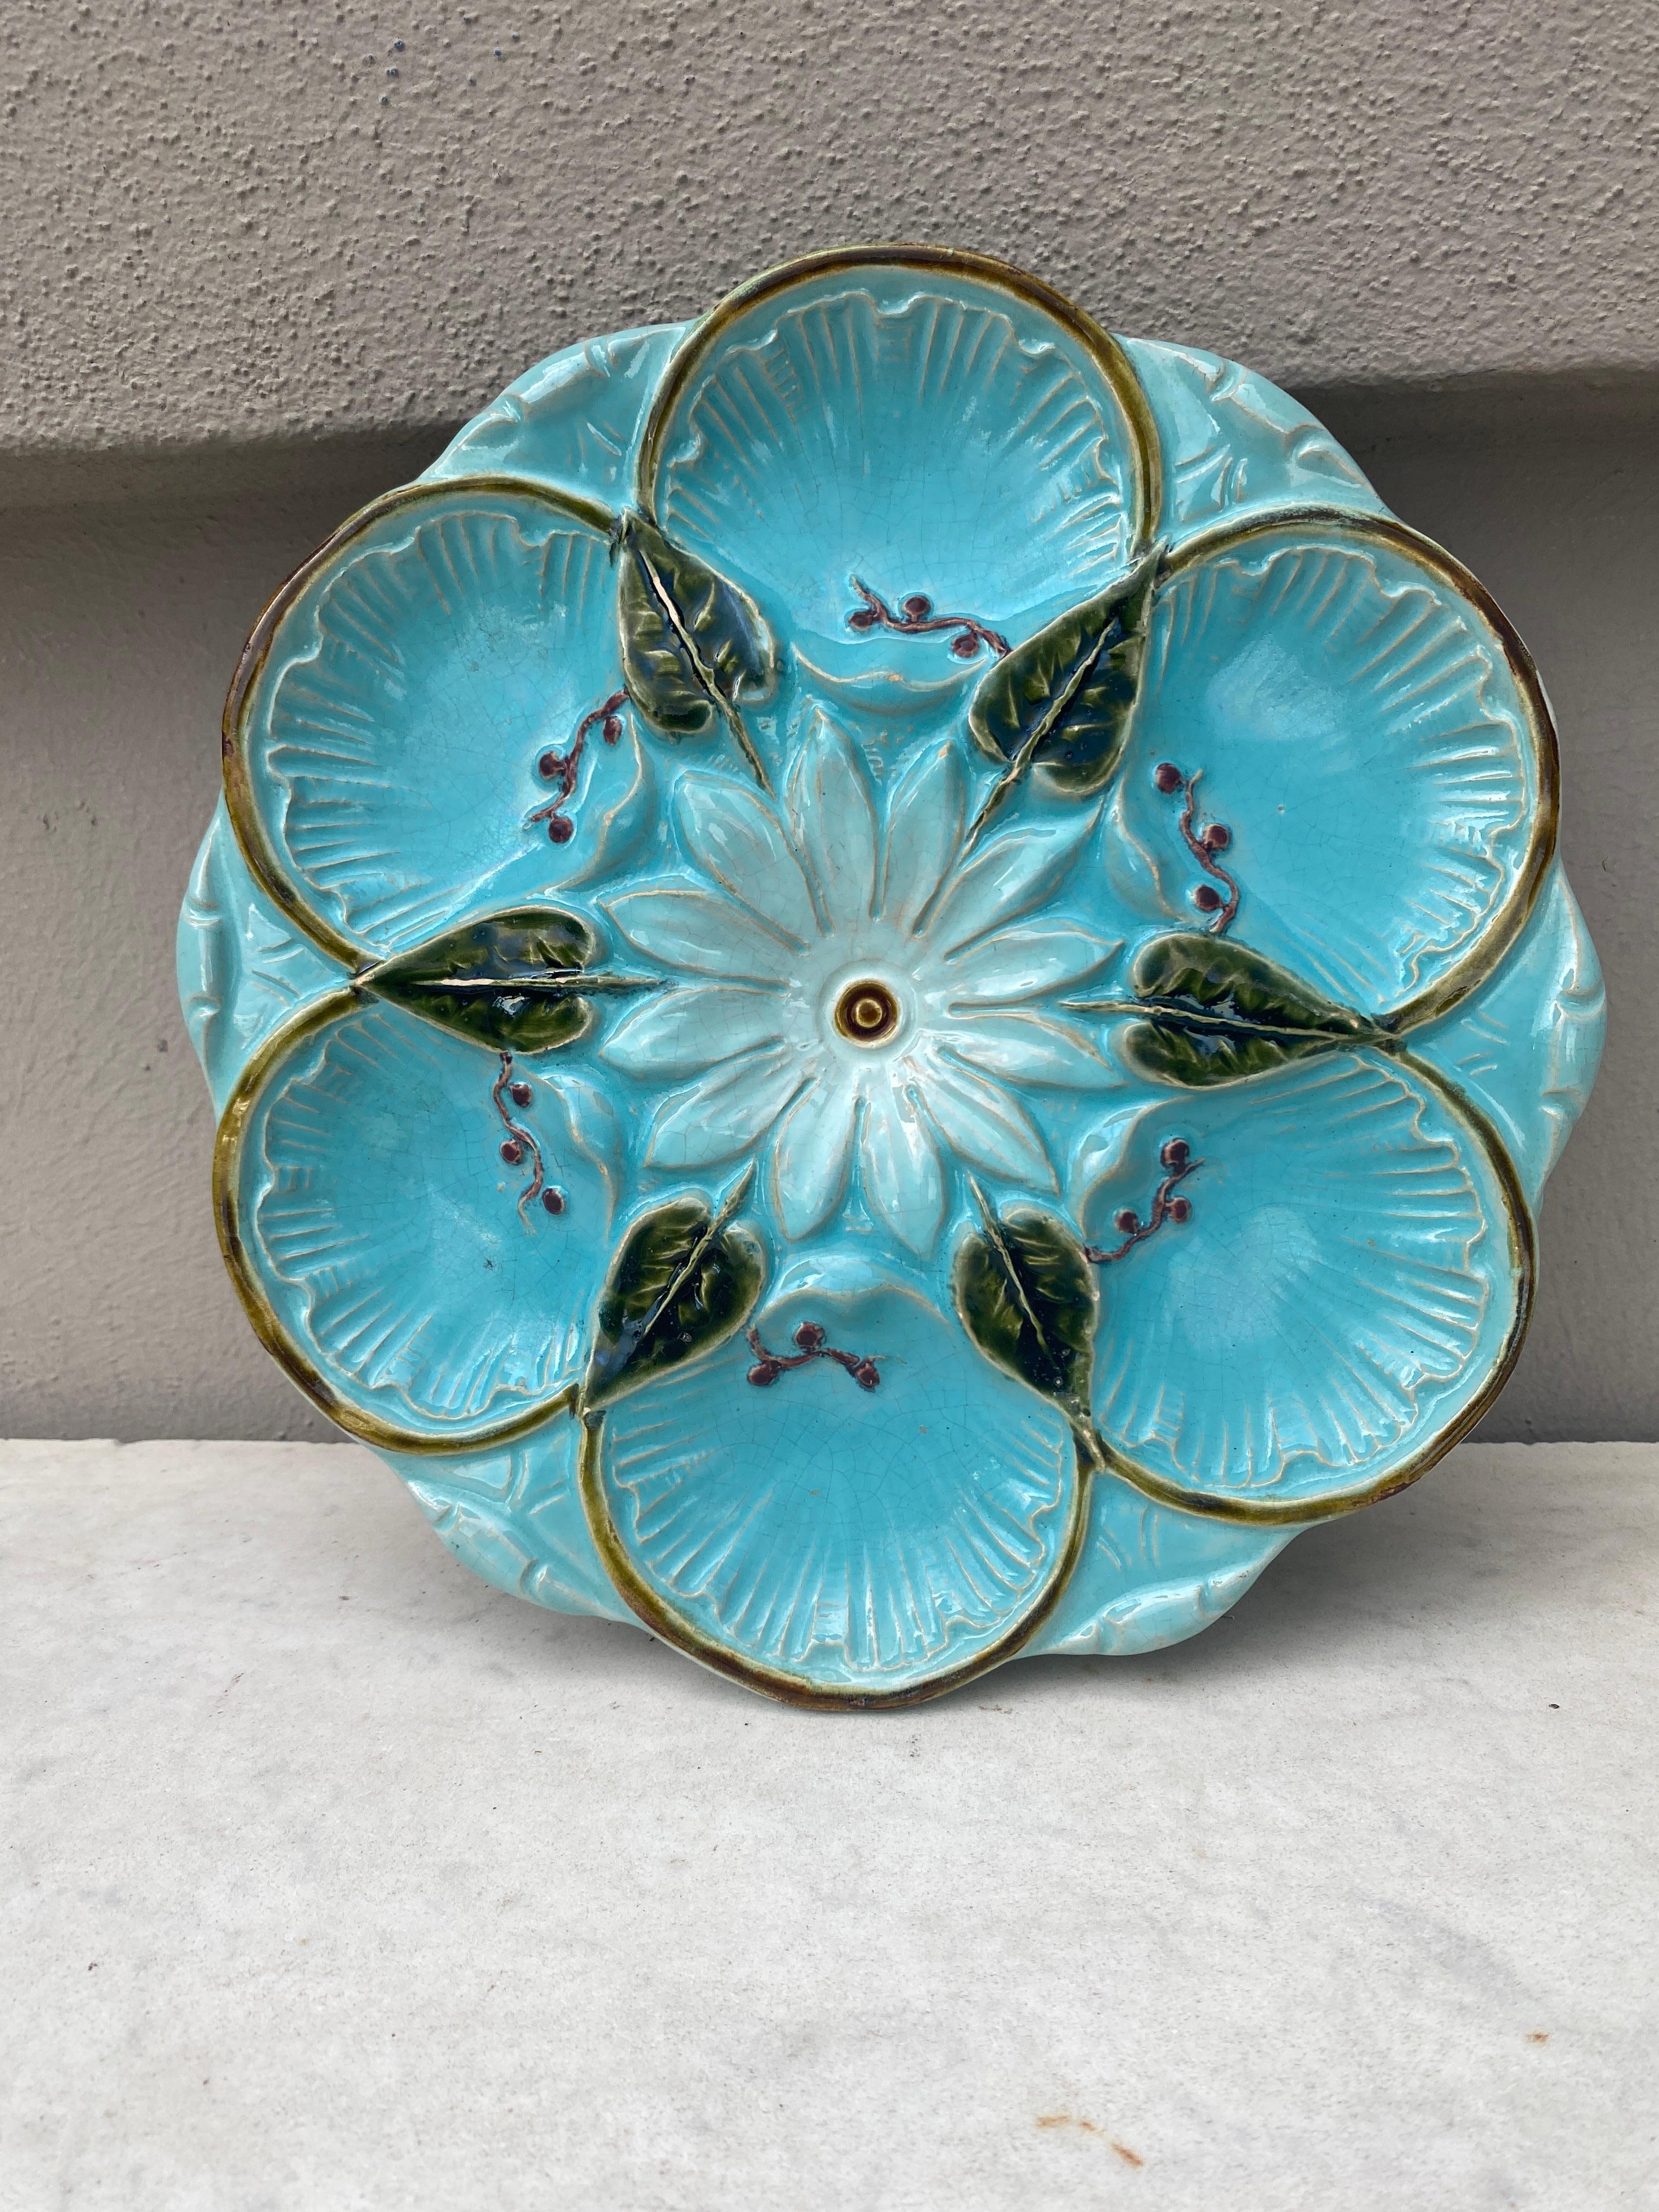 Very rare French aqua Majolica oyster plate, circa 1890.
White flower on the center and leaves.